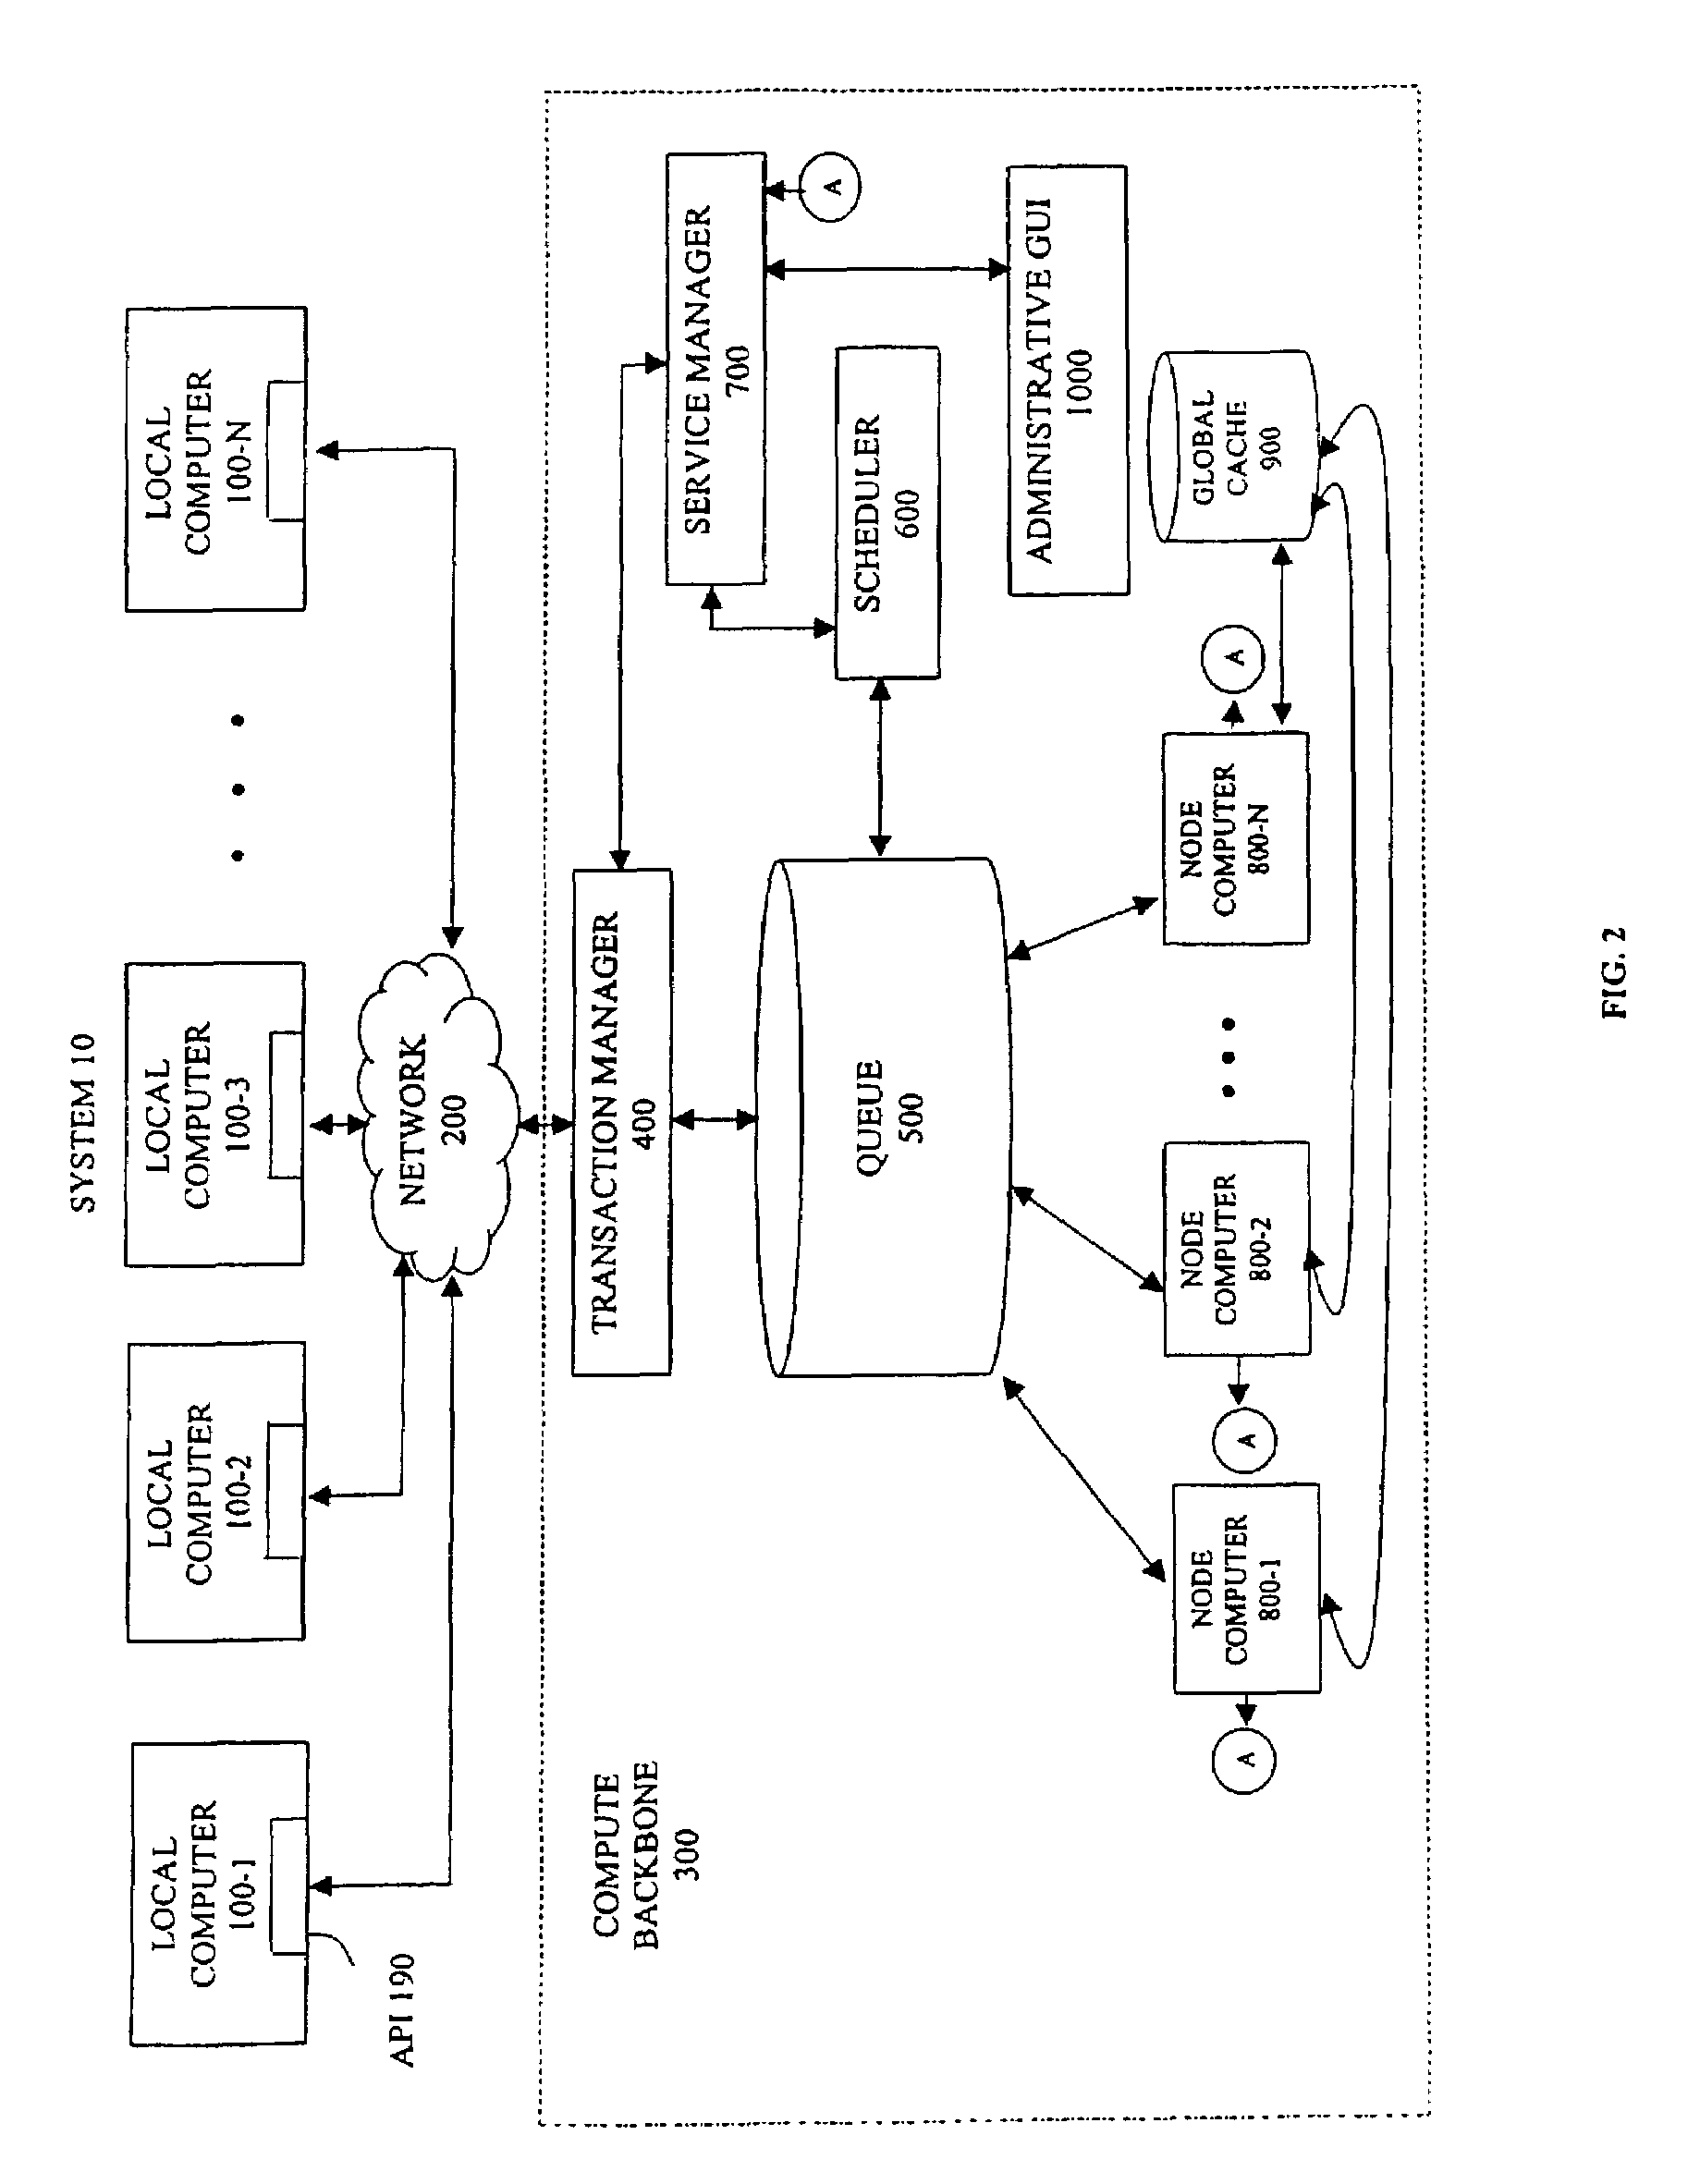 System and method for allocating computing resources of a distributed computing system